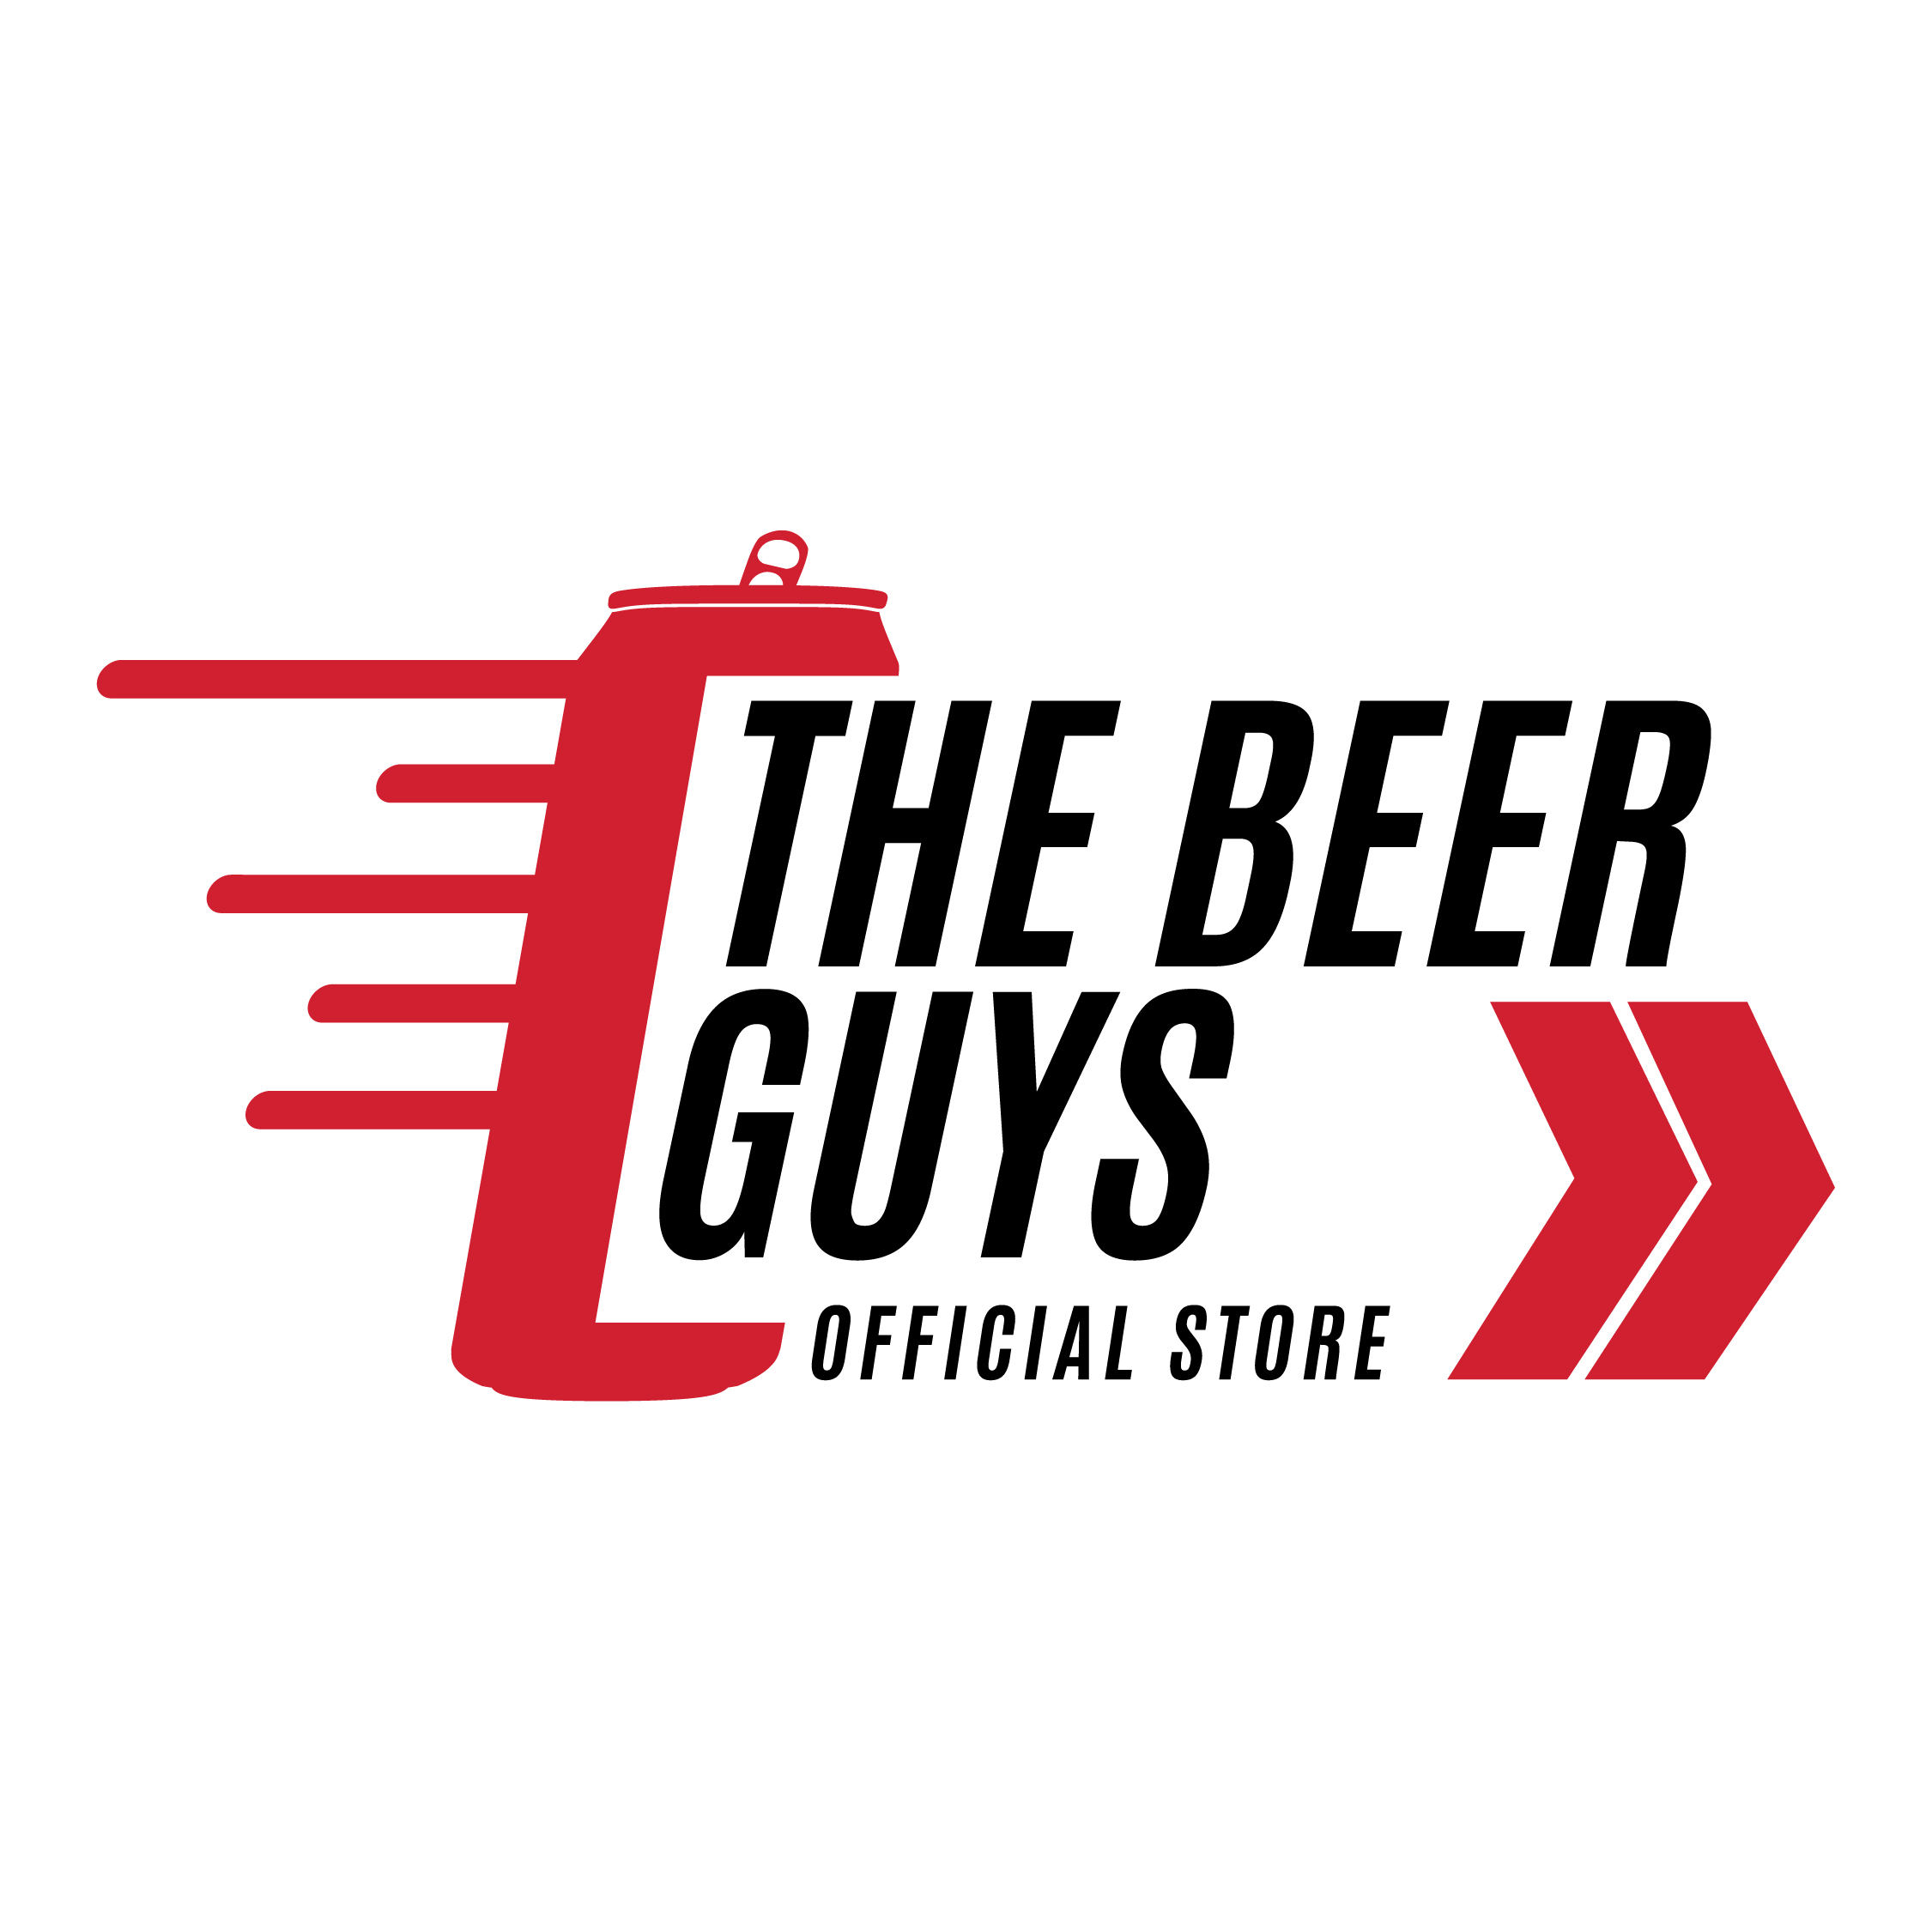 The Beer Guys Store Semarang Official Store